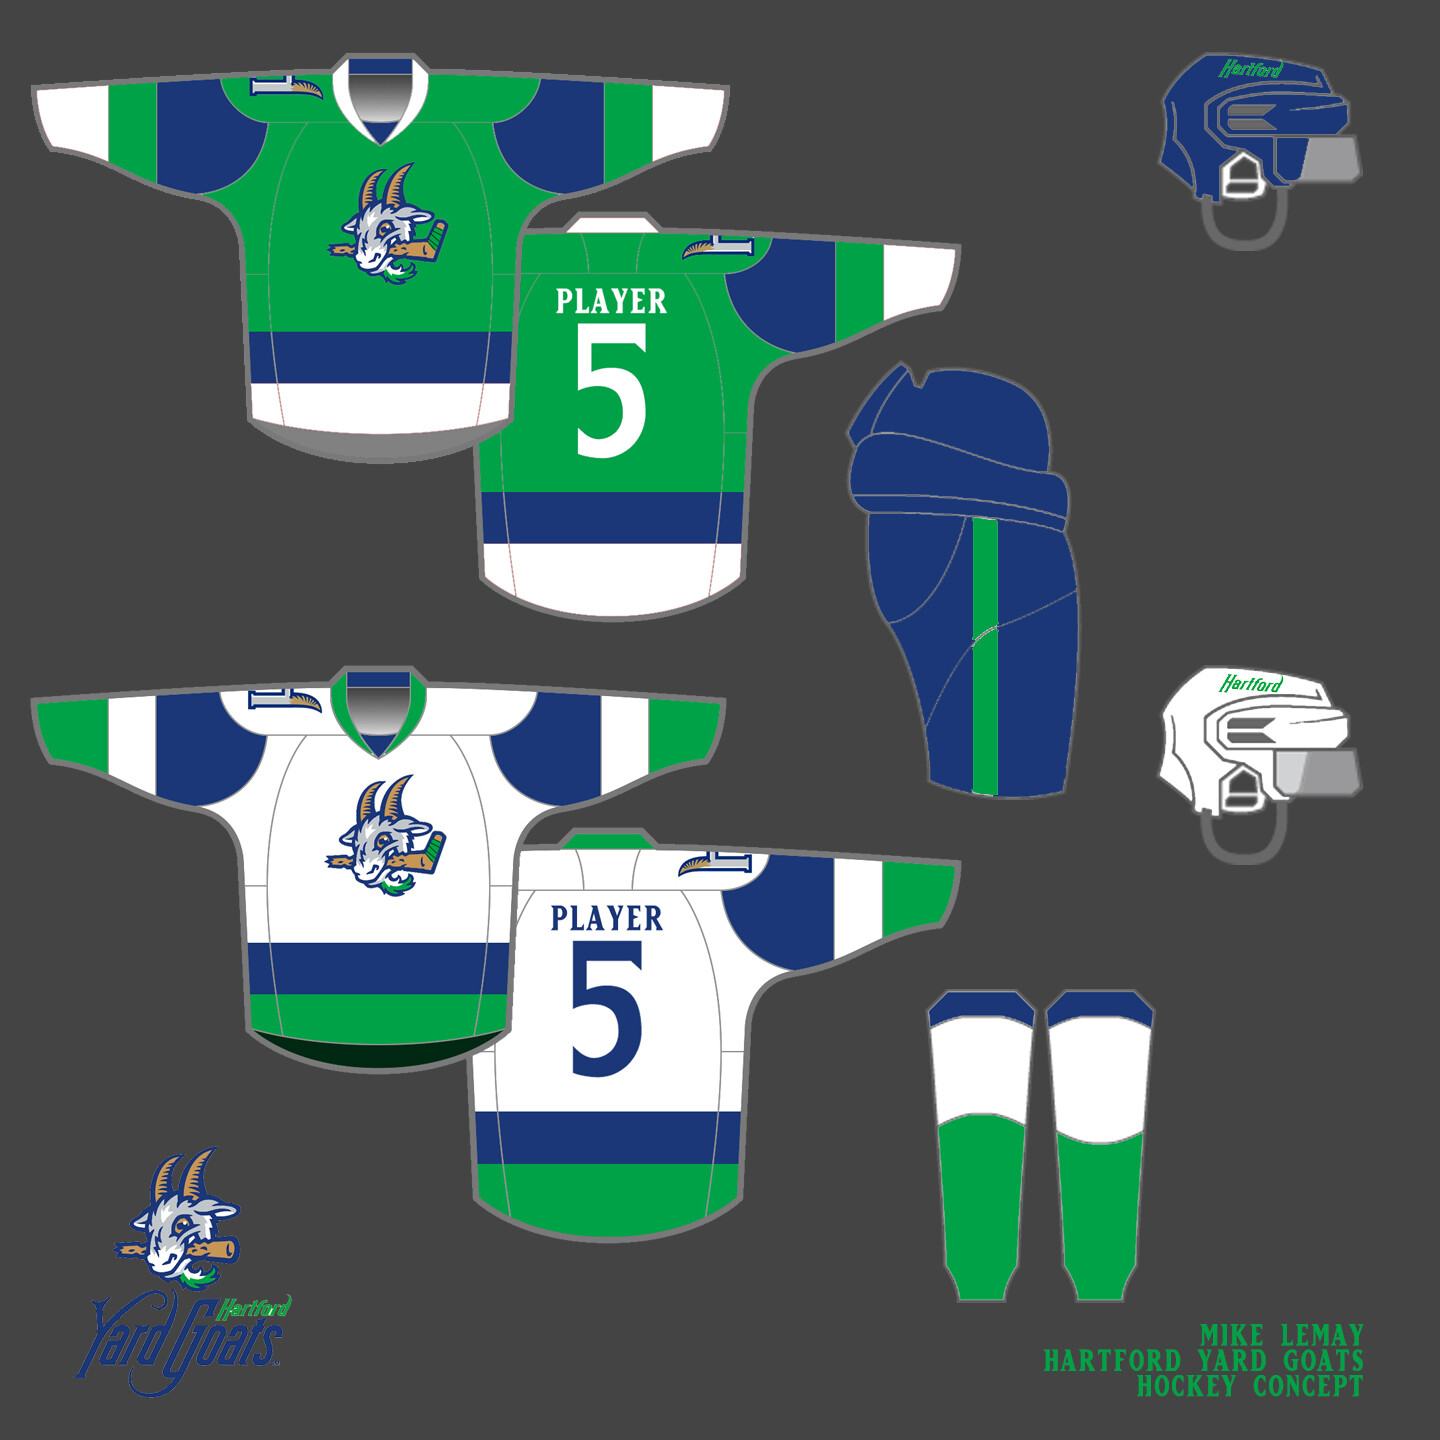 Mike LeMay - Yard Goats Hockey Concept